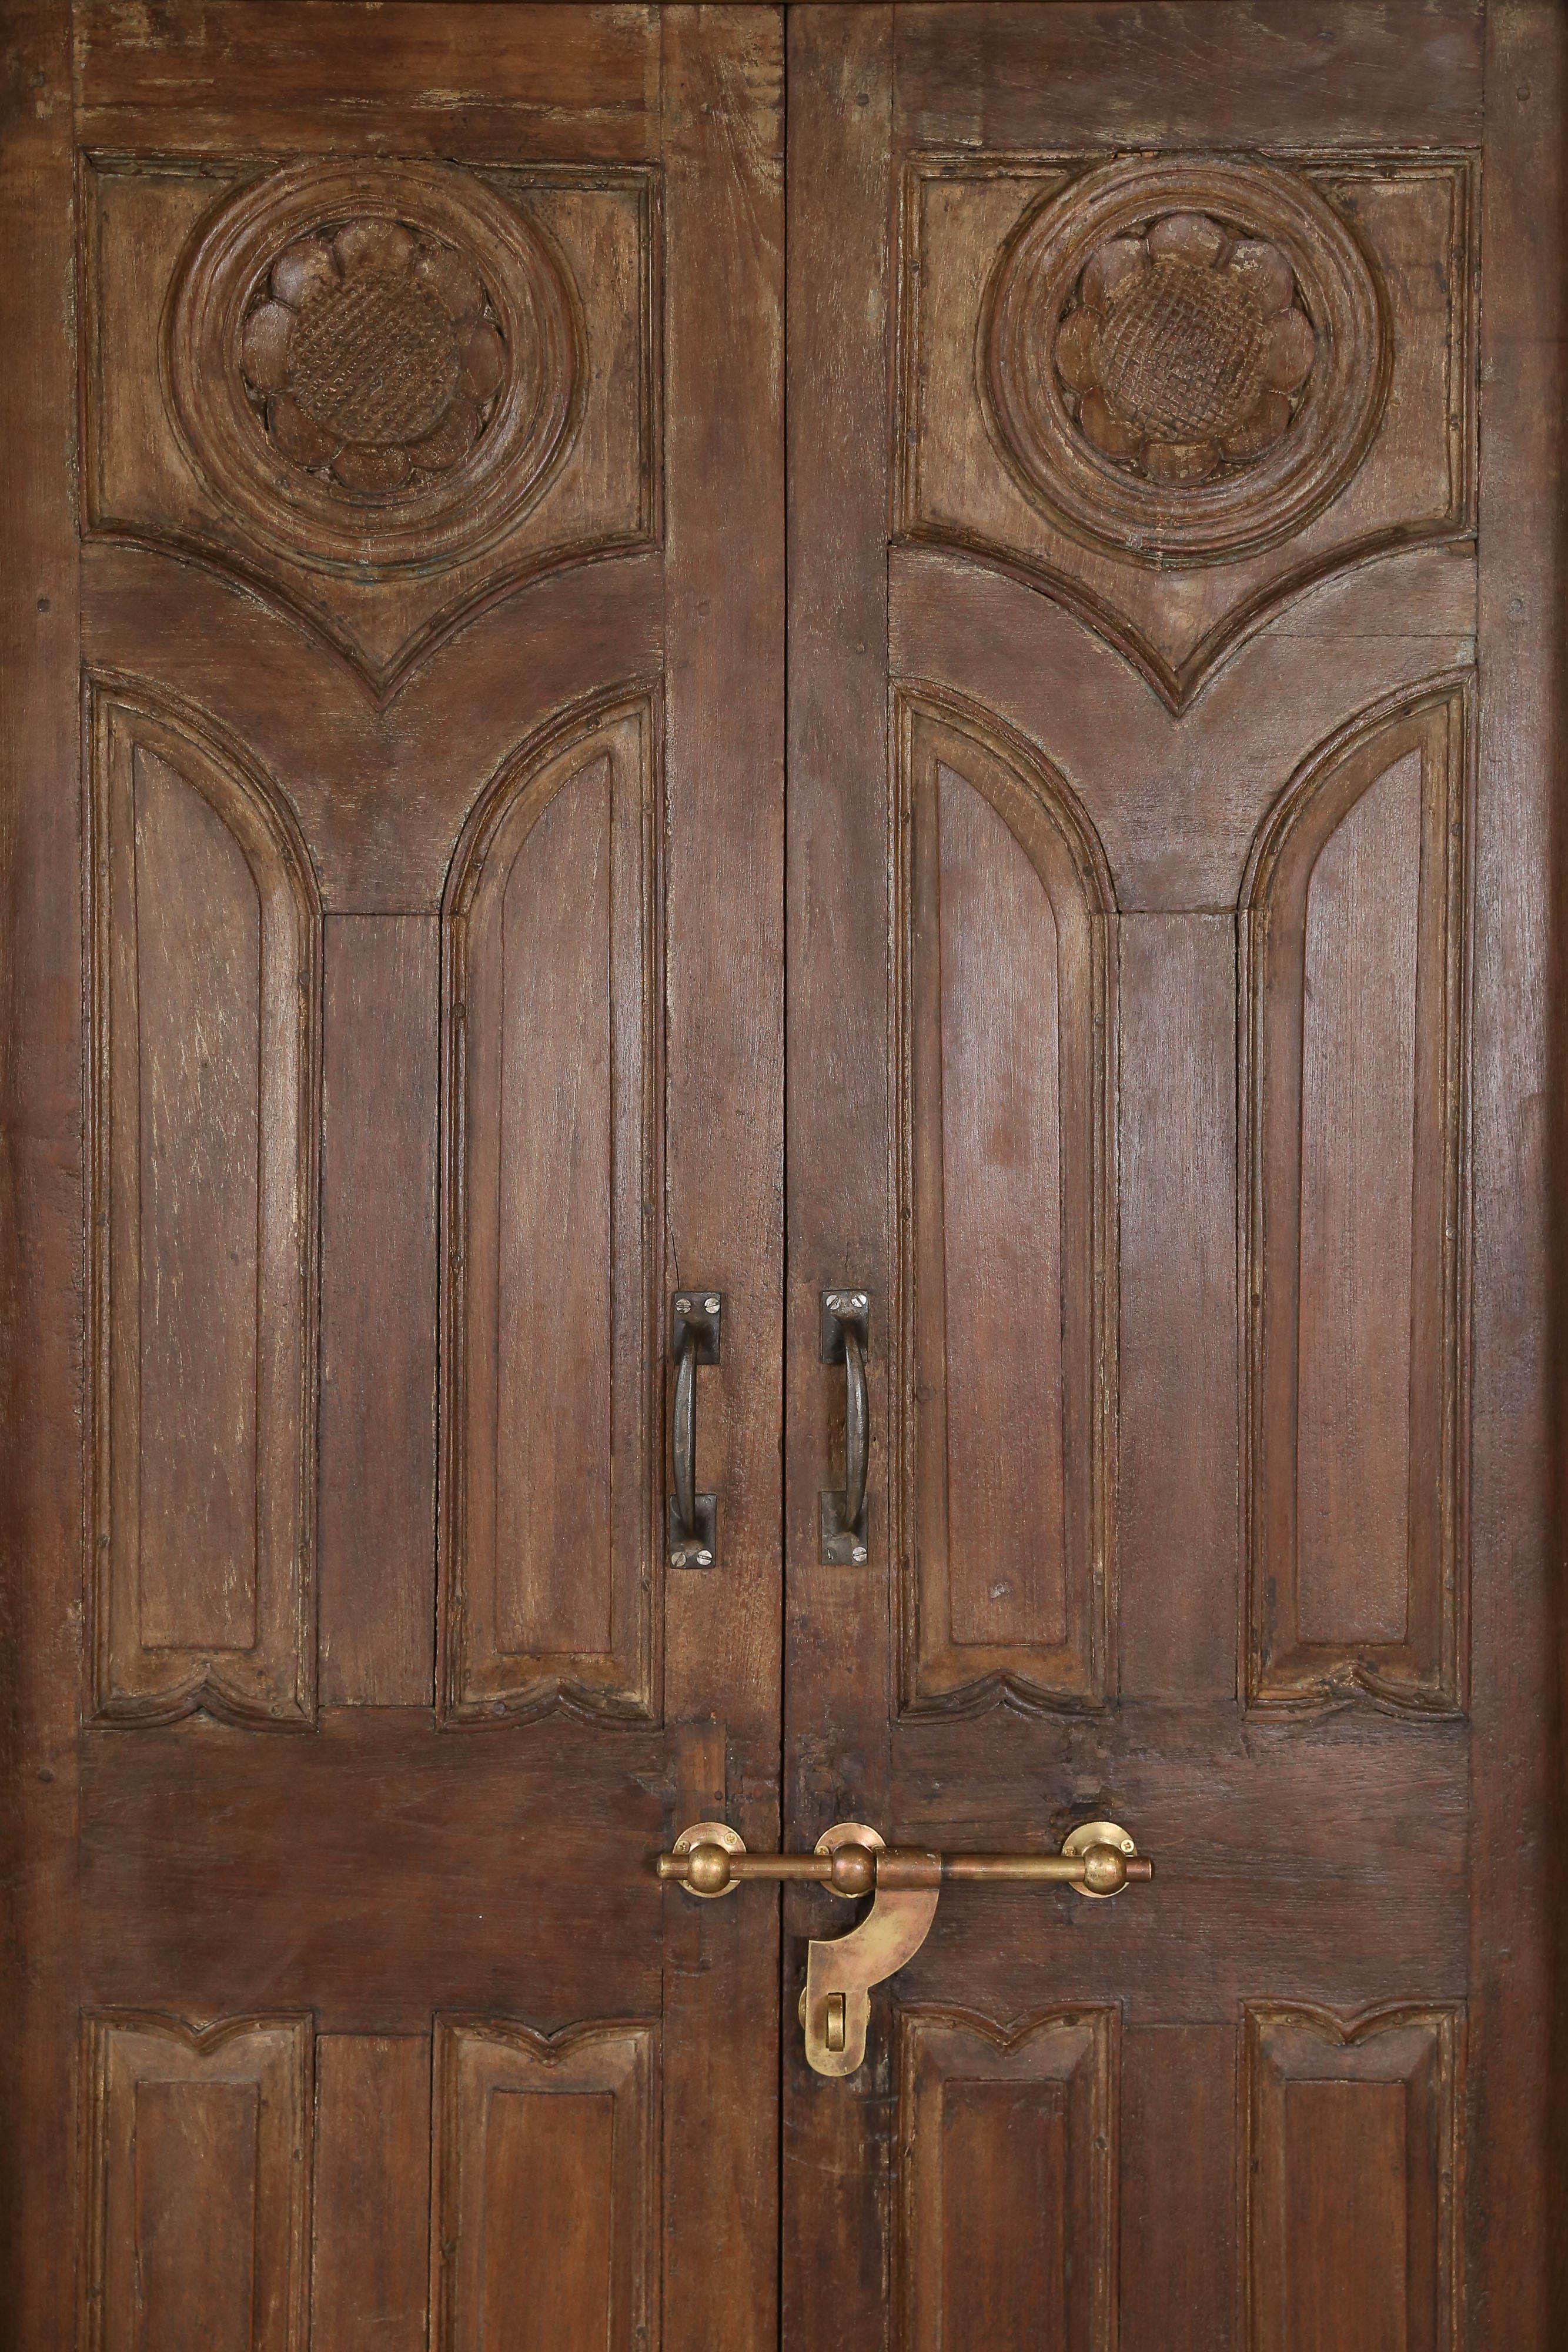 This door comes from a custom built mansion of an European settler in Central India This door unlike other doors made at that times is finished both outside and inside. Made of solid teak wood this door will survive several more decades. It retains